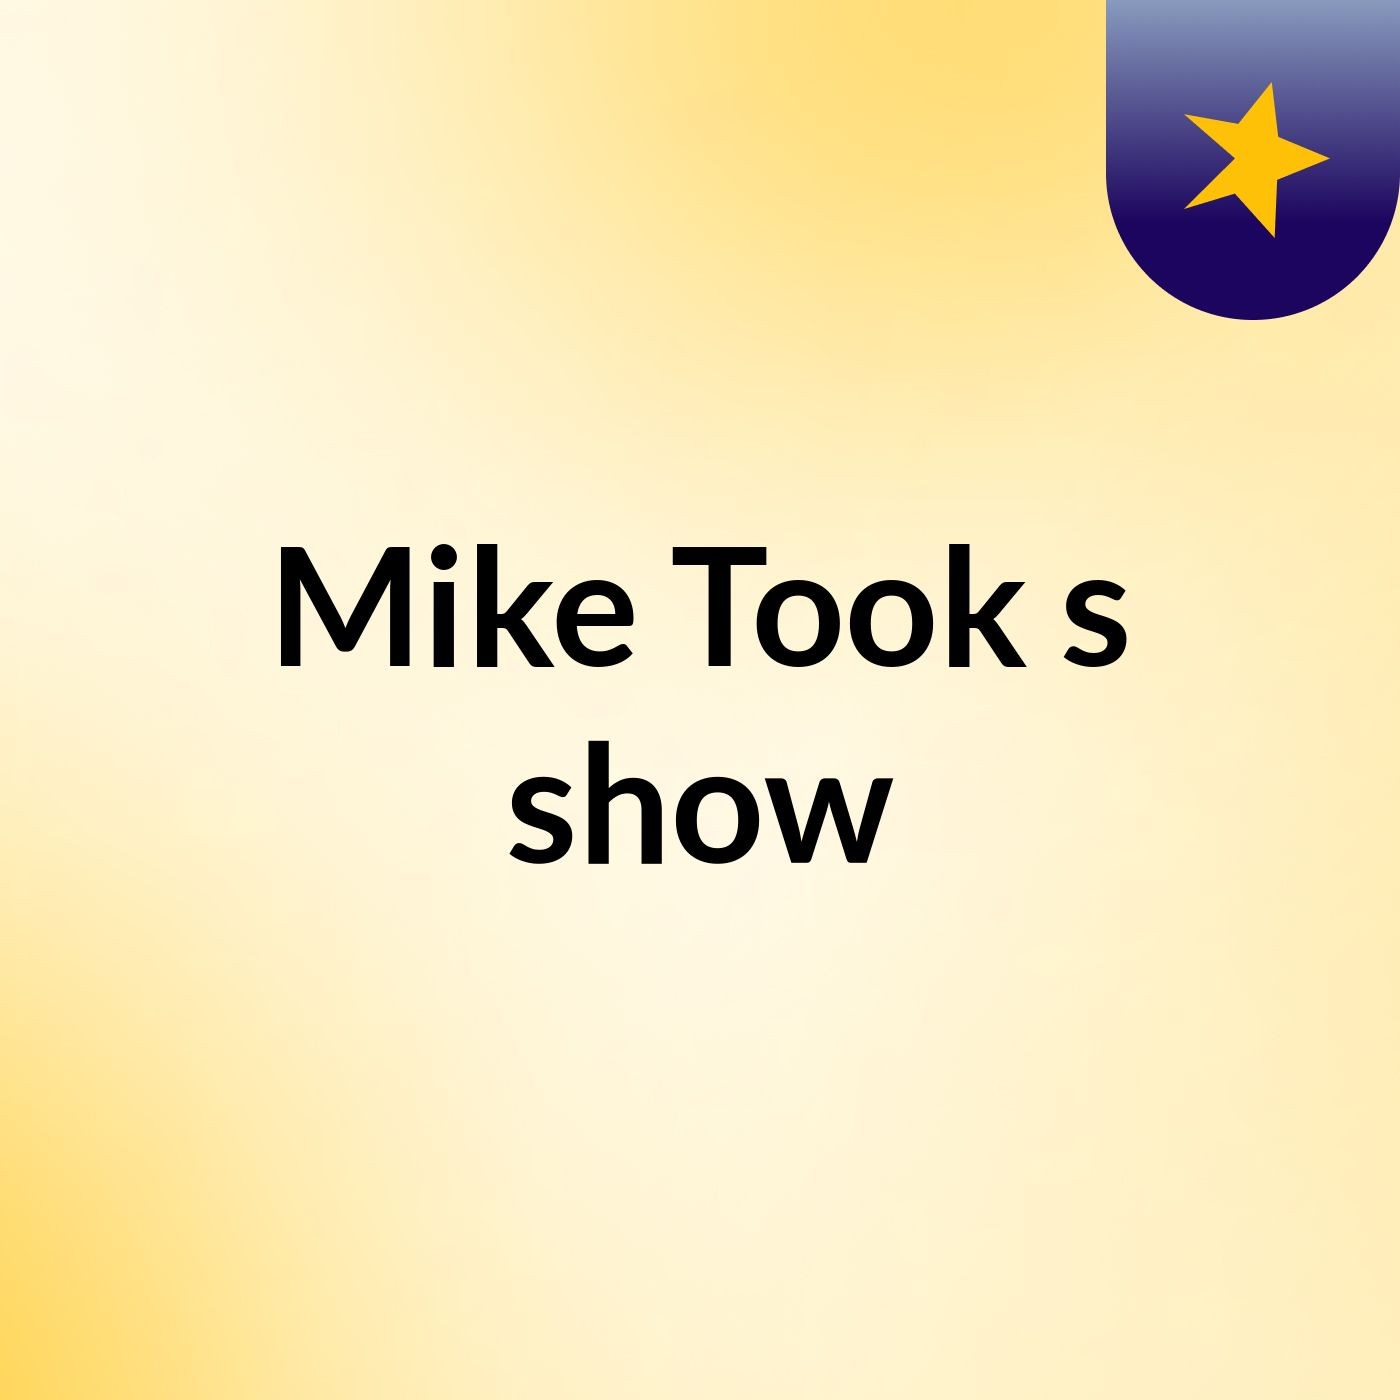 Mike Took's show